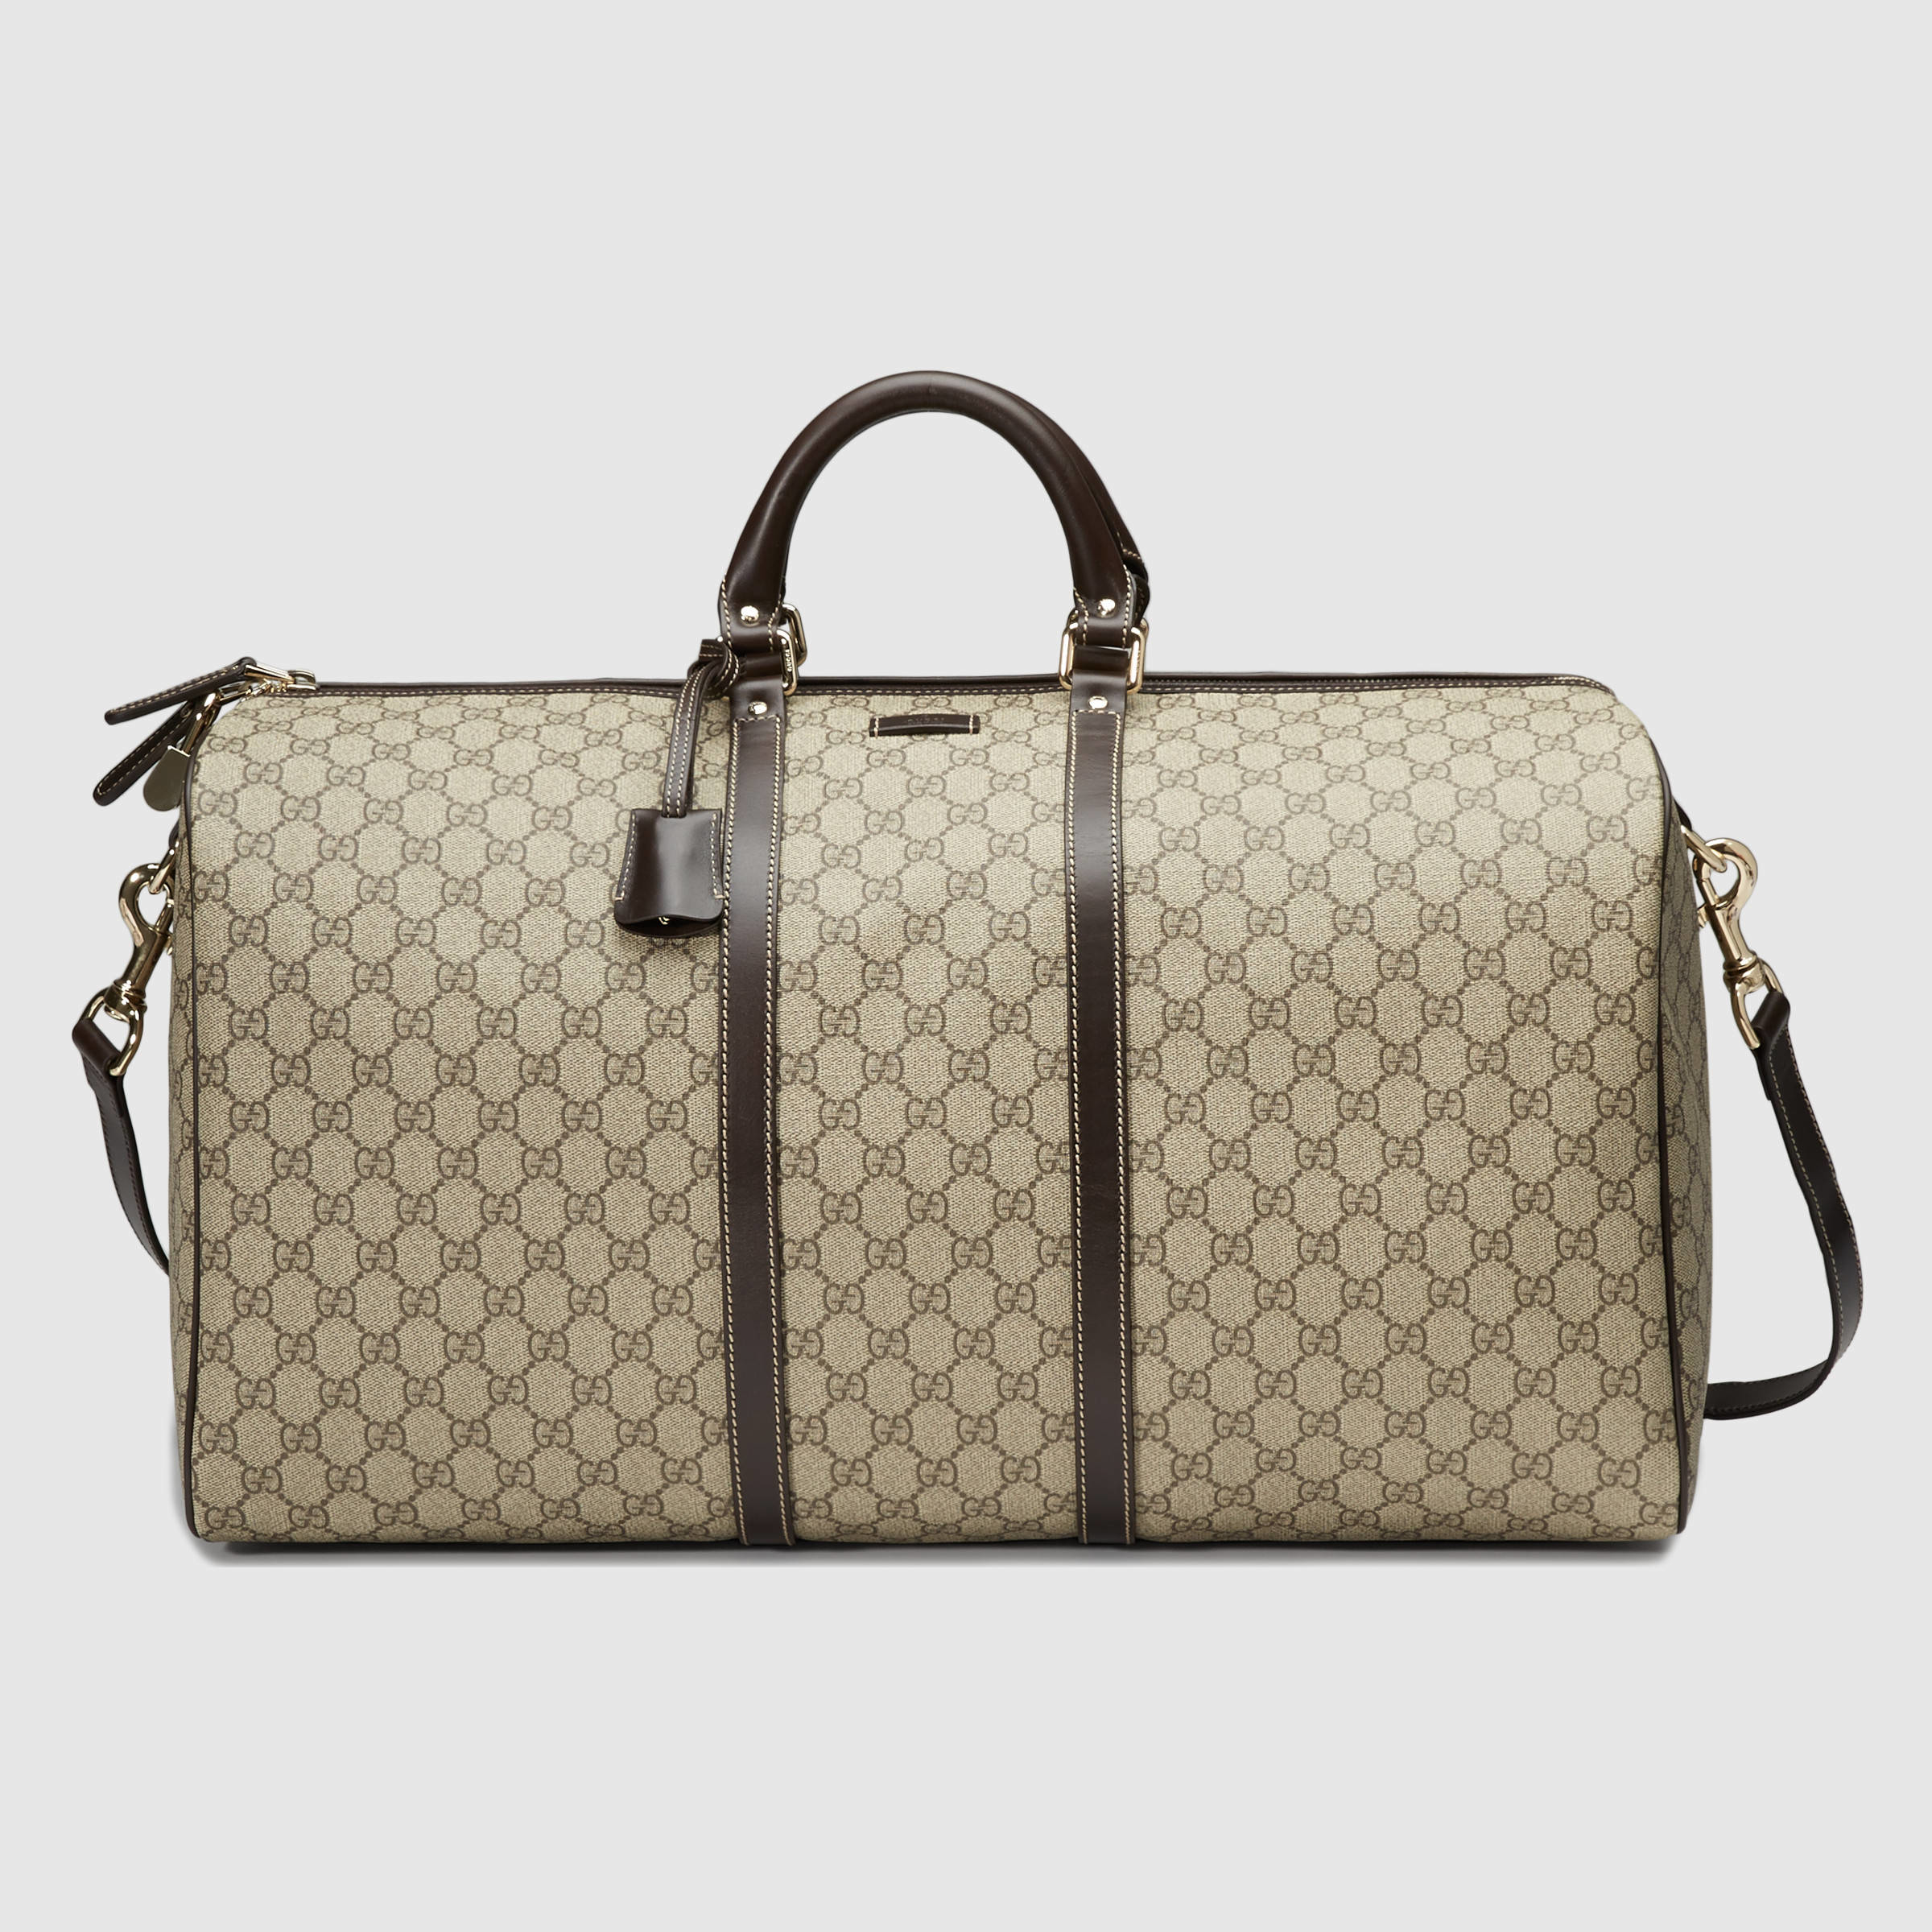 Gucci Large Carry-on Duffle Bag in Natural for Men - Lyst